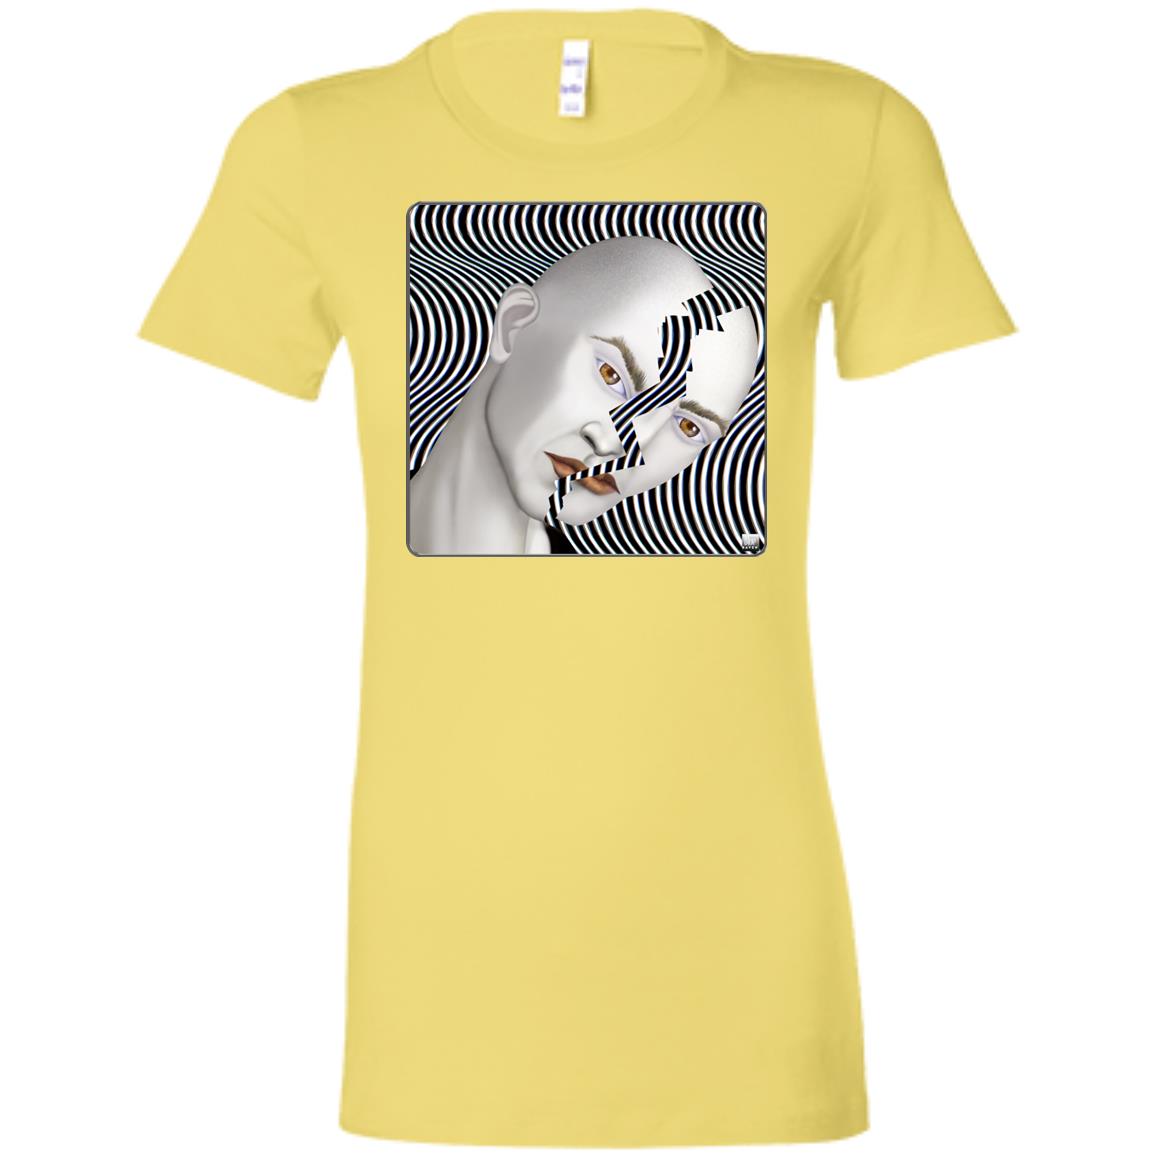 cracked until coffee - Women's Fitted T-Shirt